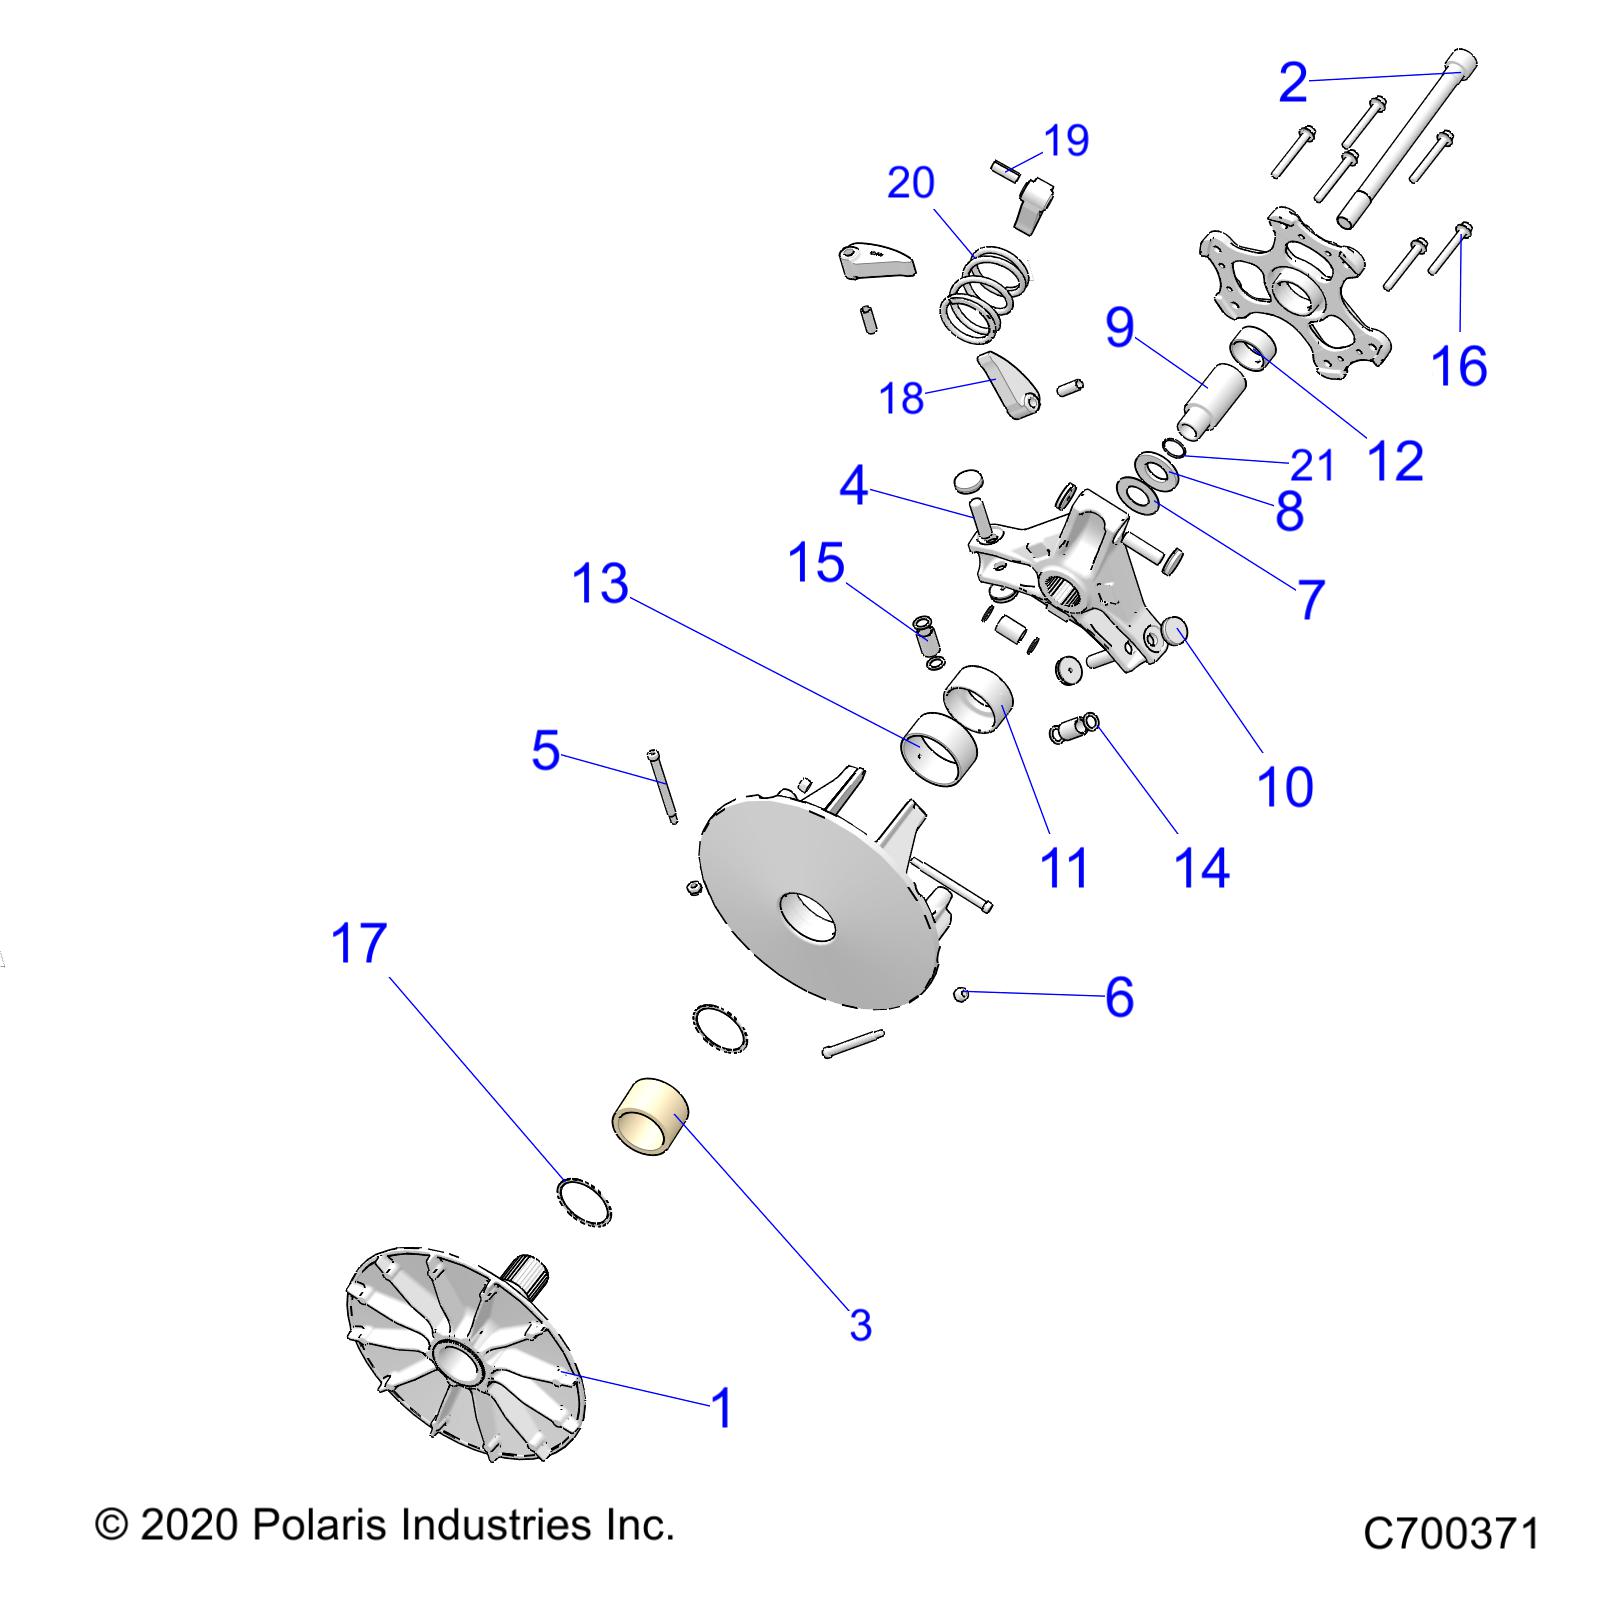 Part Number : 1327300 ASM-DRIVE CLUTCH BASIC P90X